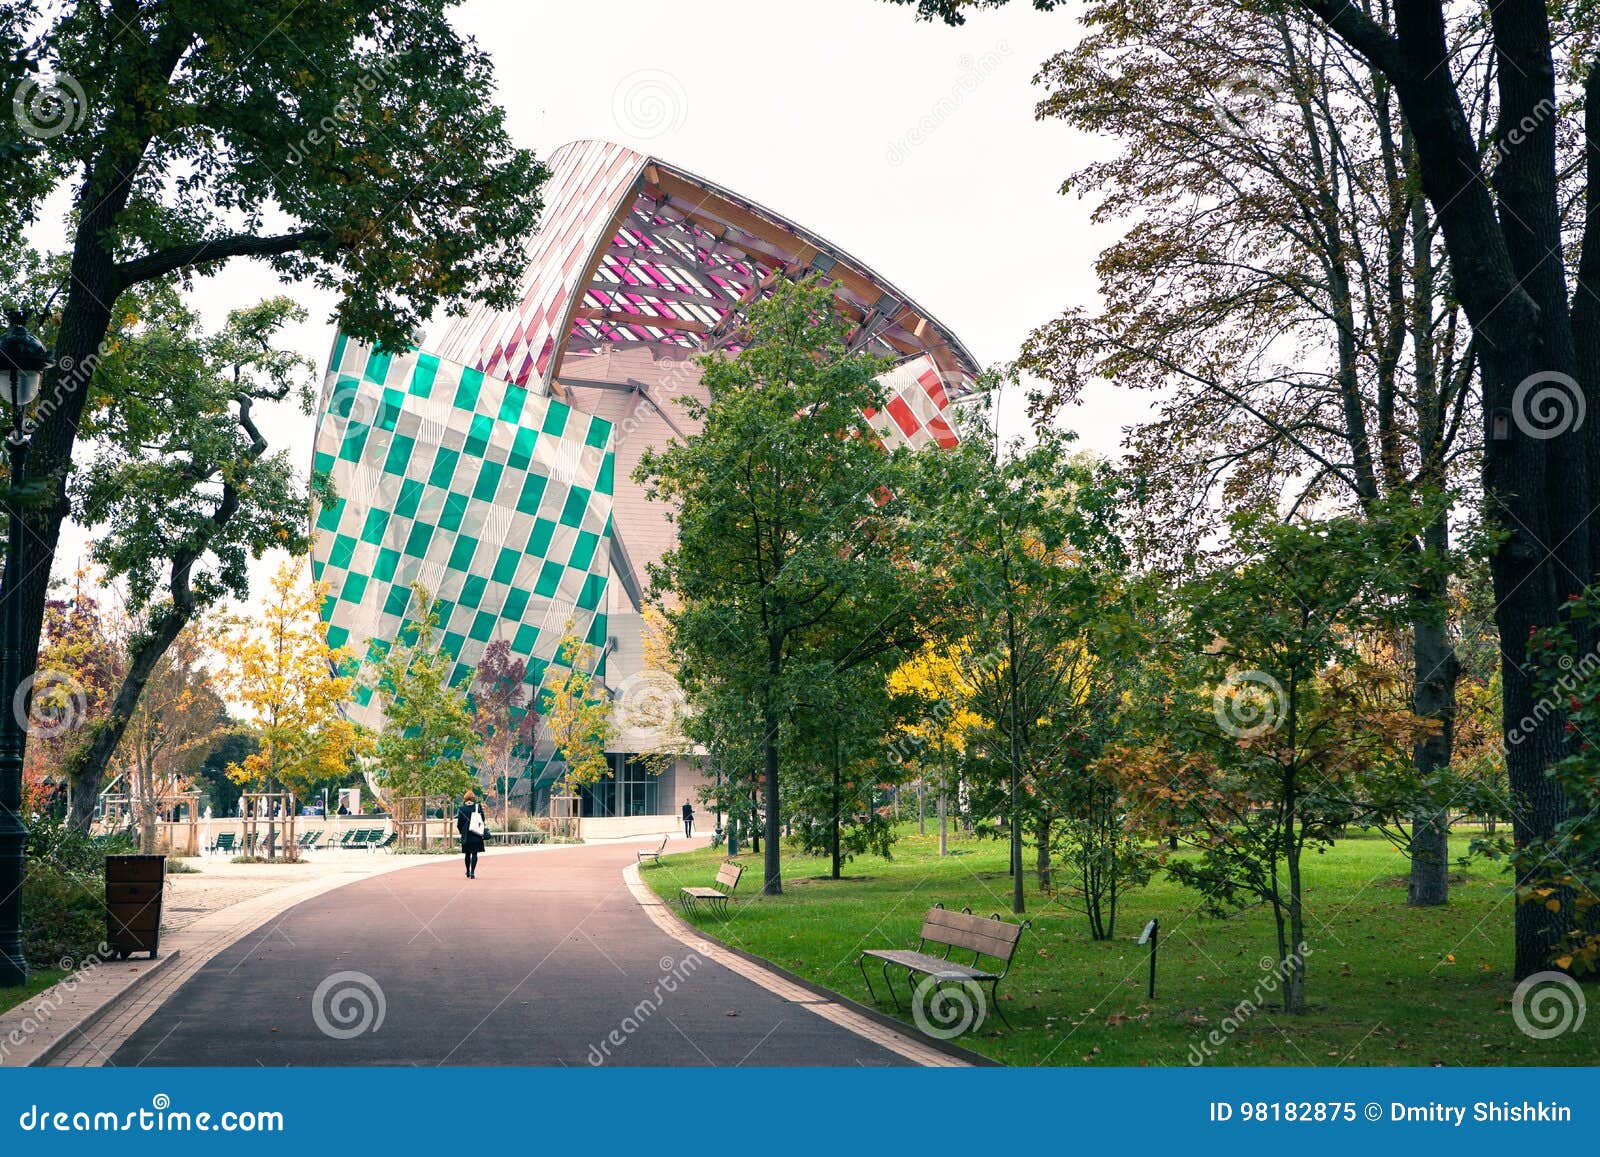 Paris, France - October 19, 2016: The Museum Of Modern Art Foundation Louis Vuitton, View From ...